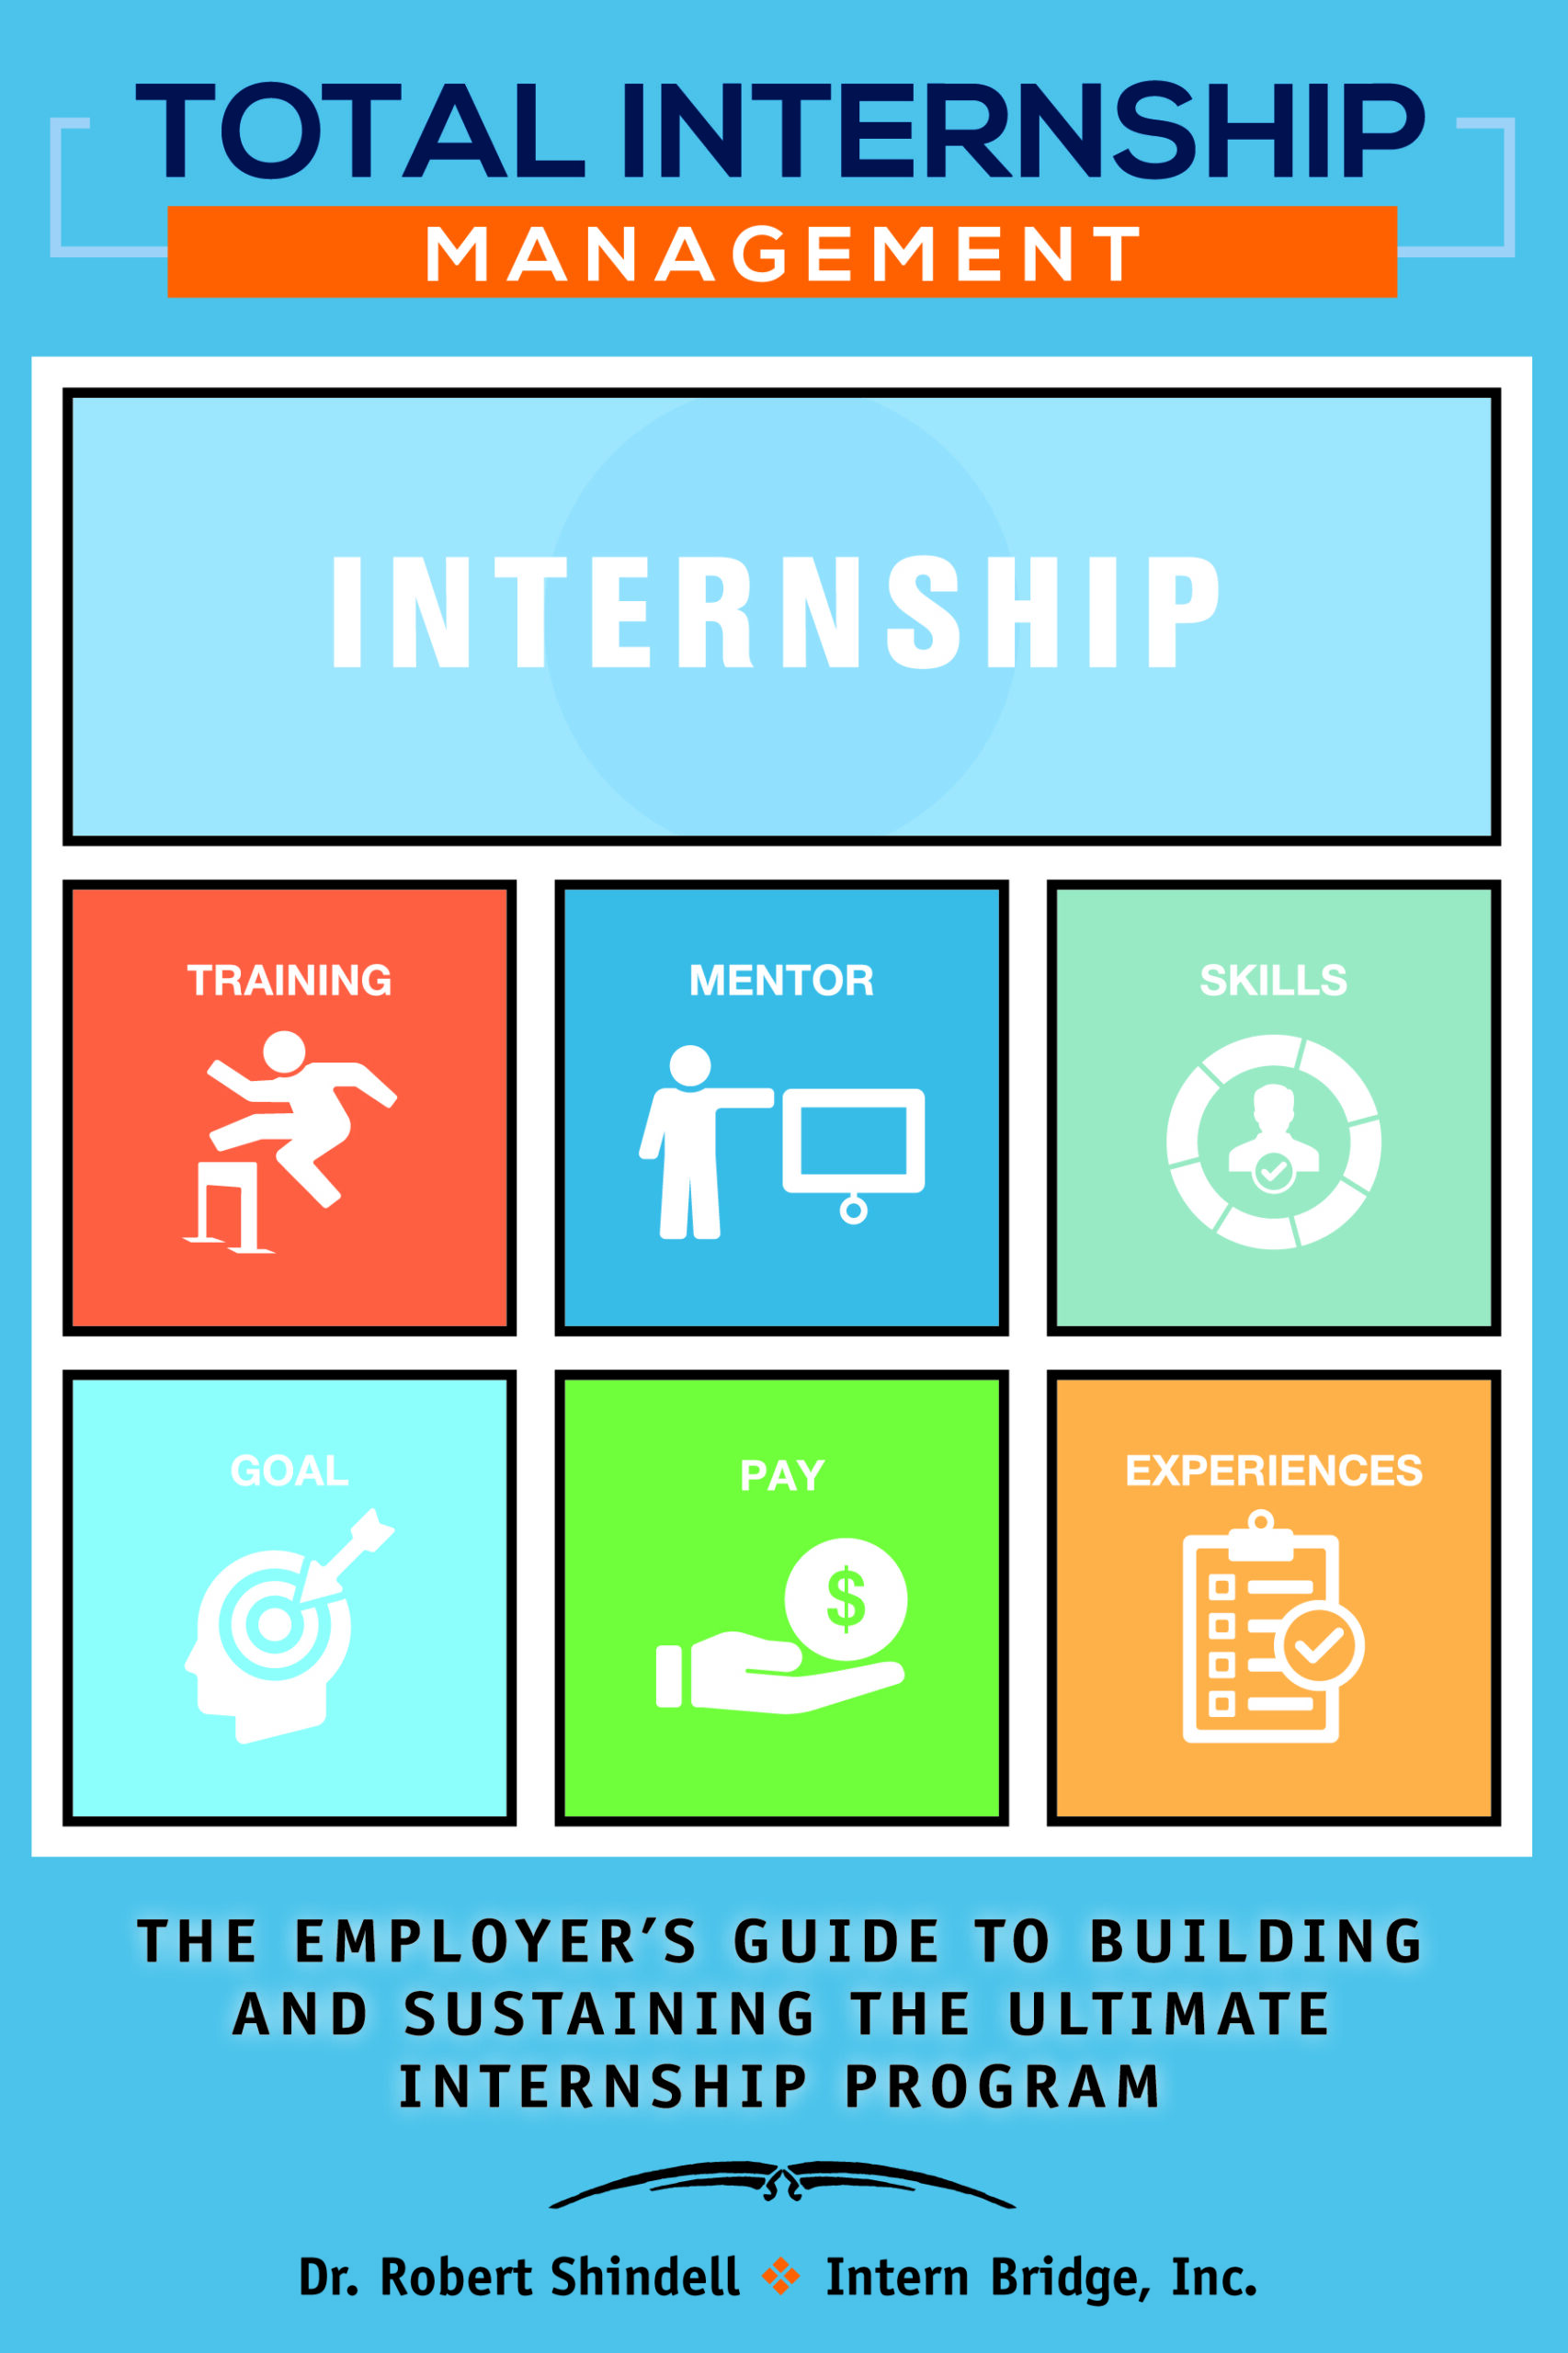 image of the front cover of the Total Internship Management book by Dr. Robert Shindell